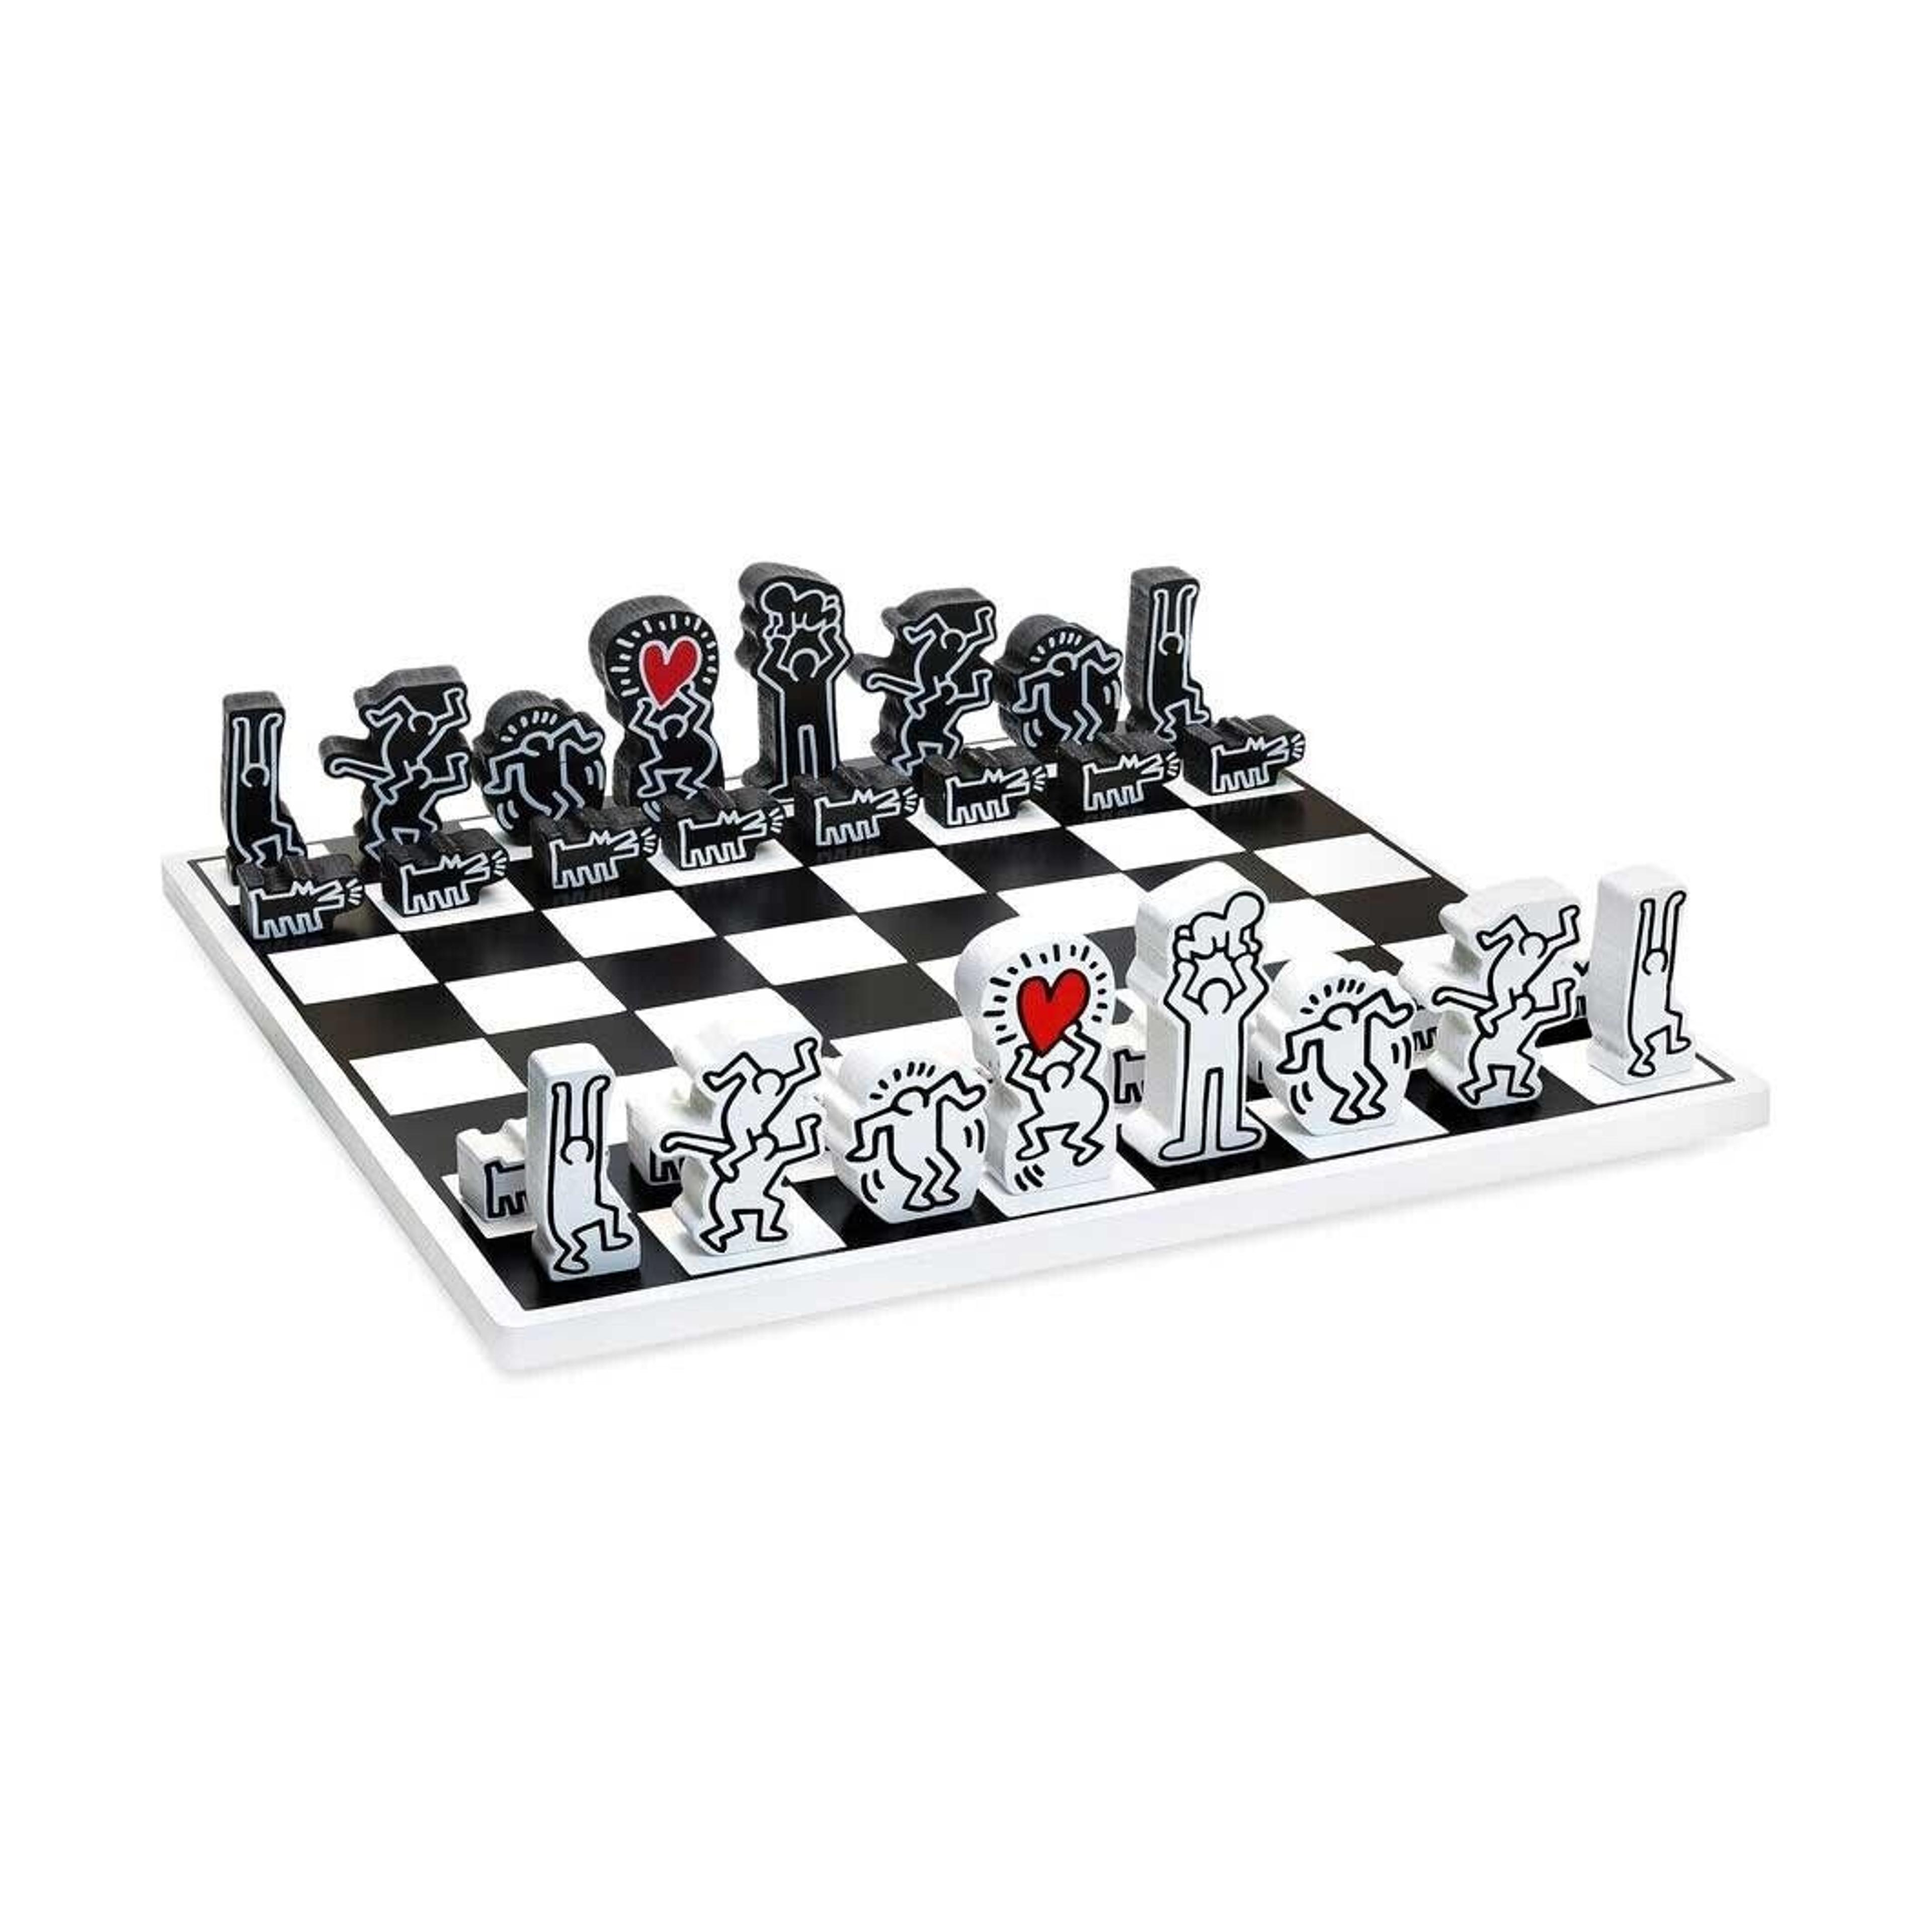 Alternate View 3 of Keith Haring x Vilac Chess Set Board